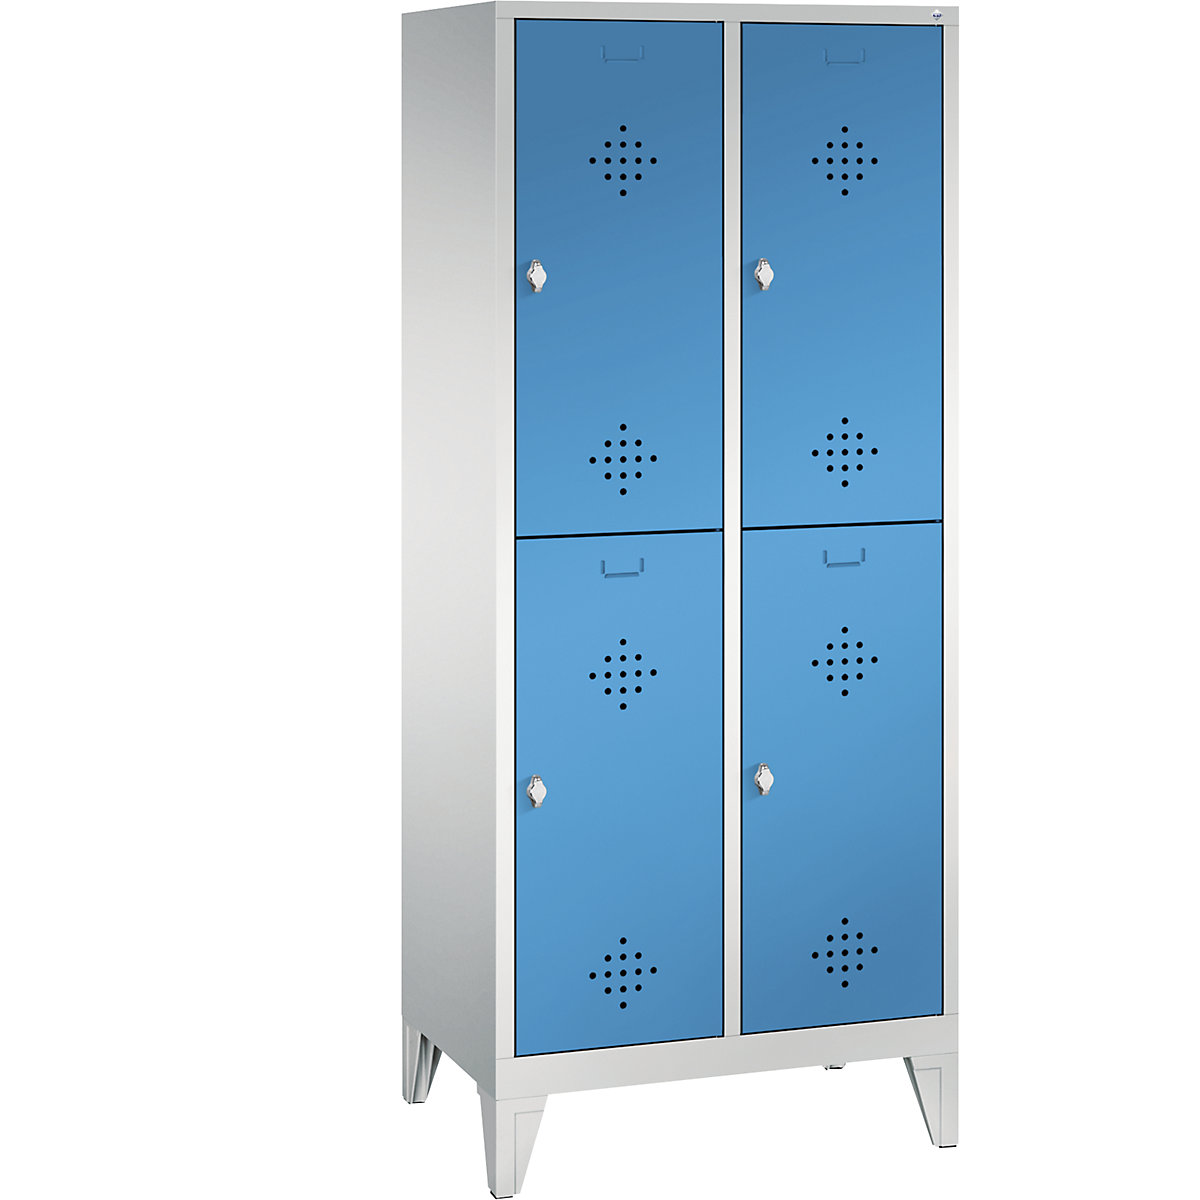 CLASSIC cloakroom locker with feet, double tier – C+P, 2 compartments, 2 shelf compartments each, compartment width 400 mm, light grey / light blue-4